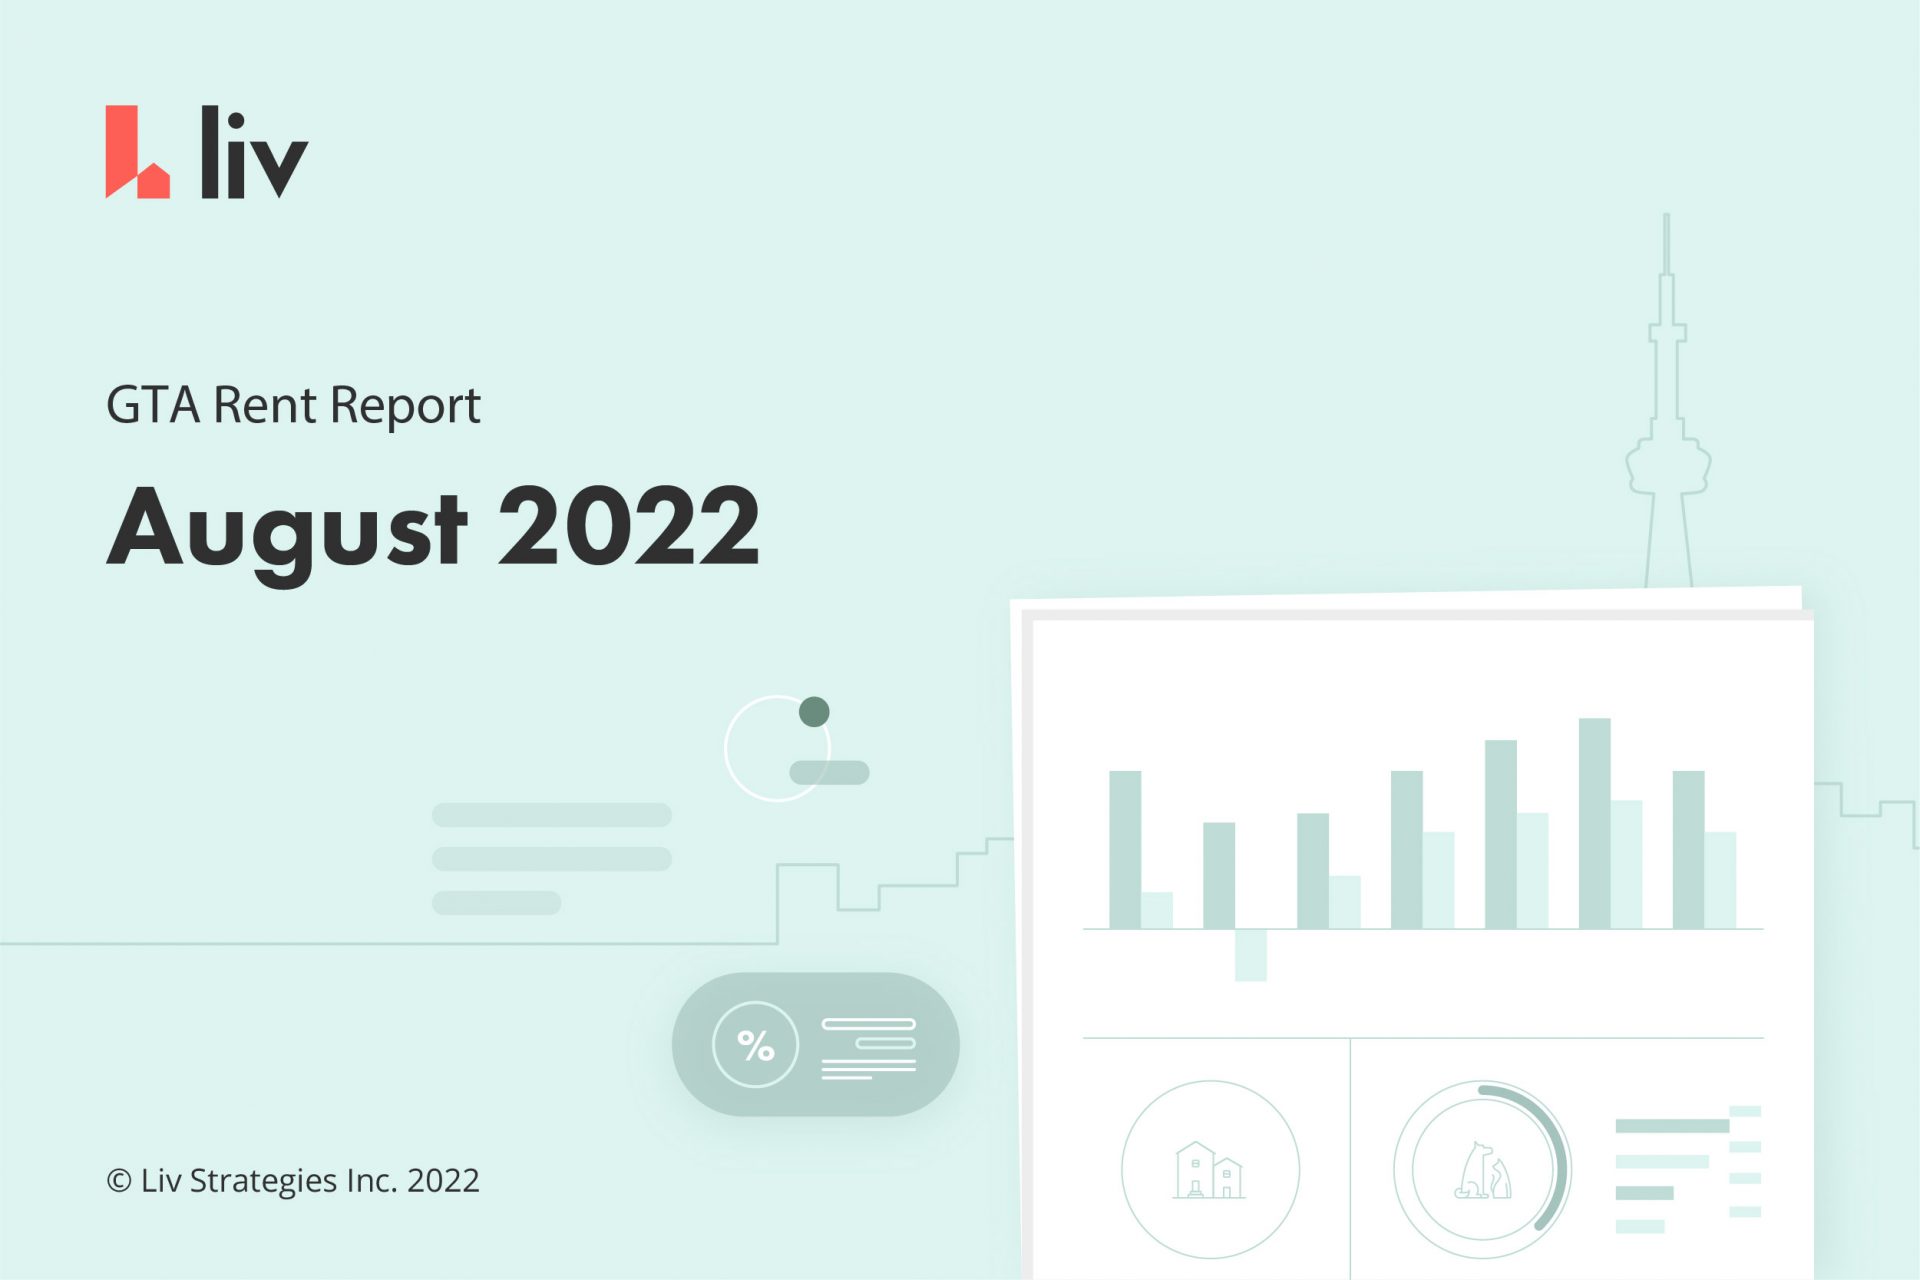 liv.rent's August 2022 rent report for the Greater Toronto Area - statistics, data and more